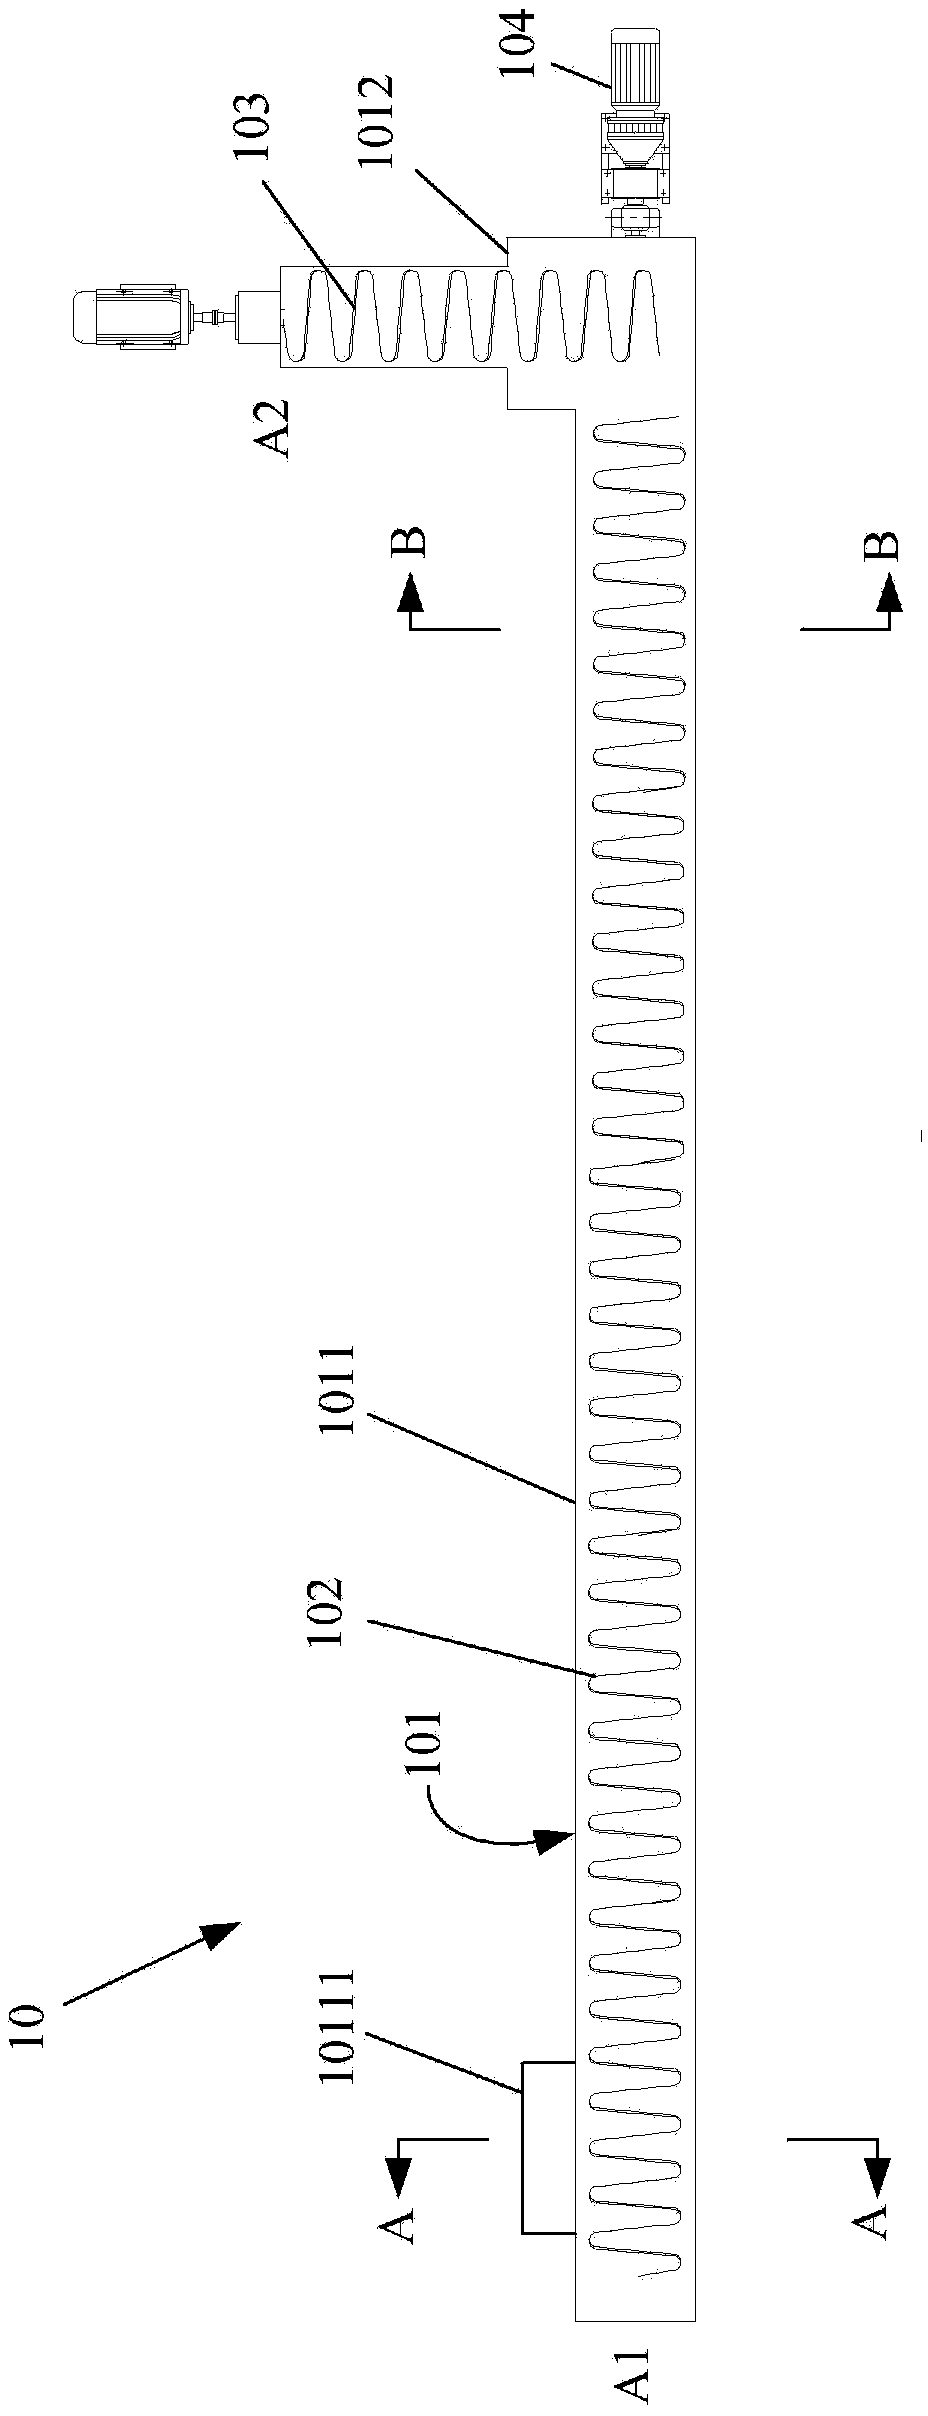 Vertical continuous aluminum-plastic composite packaging material separating system capable of recovering separating agent